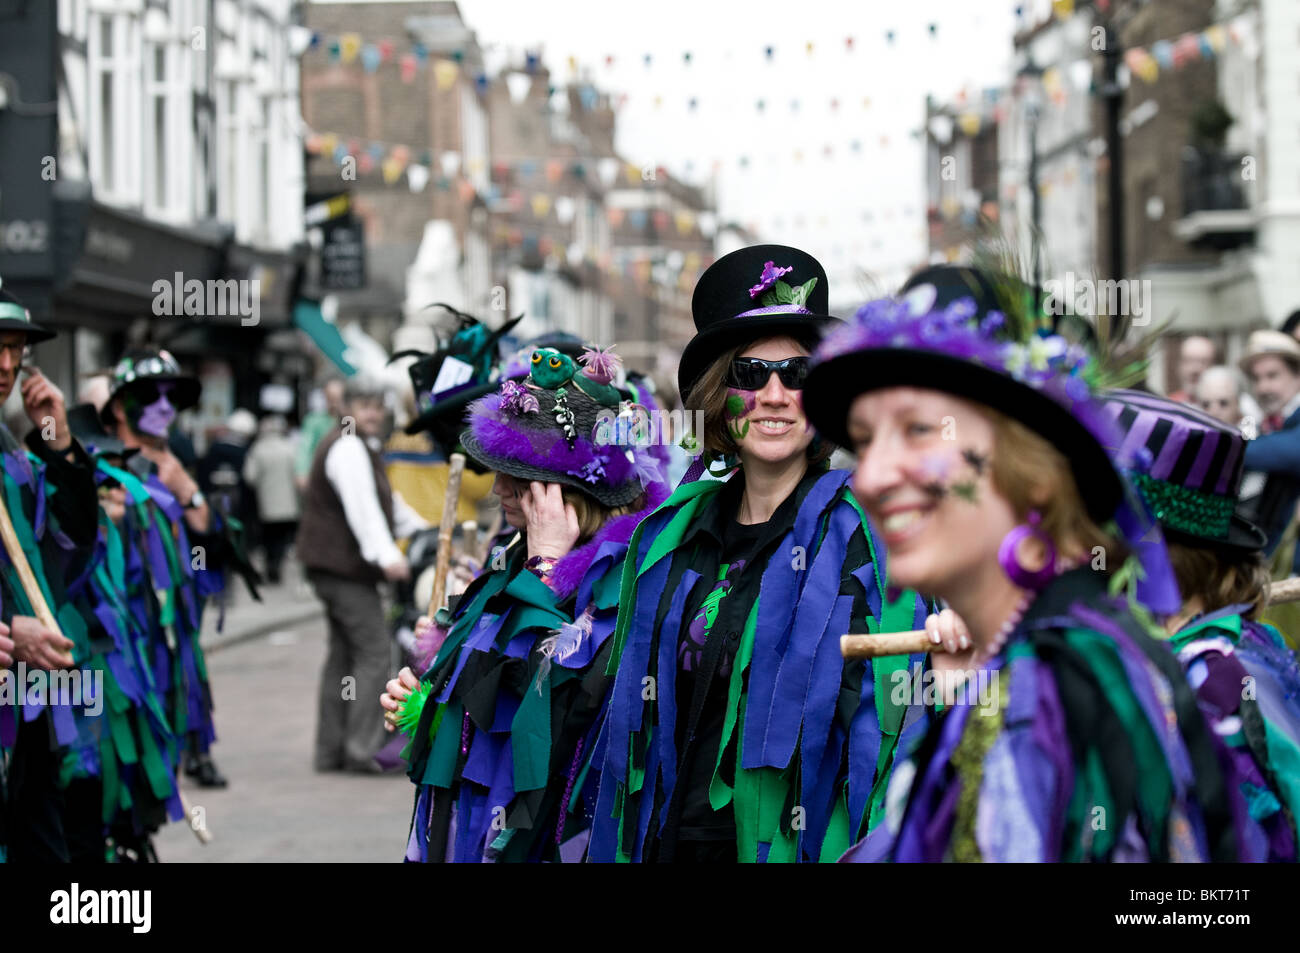 Wicket Brood Morris at the Sweeps Festival Stock Photo